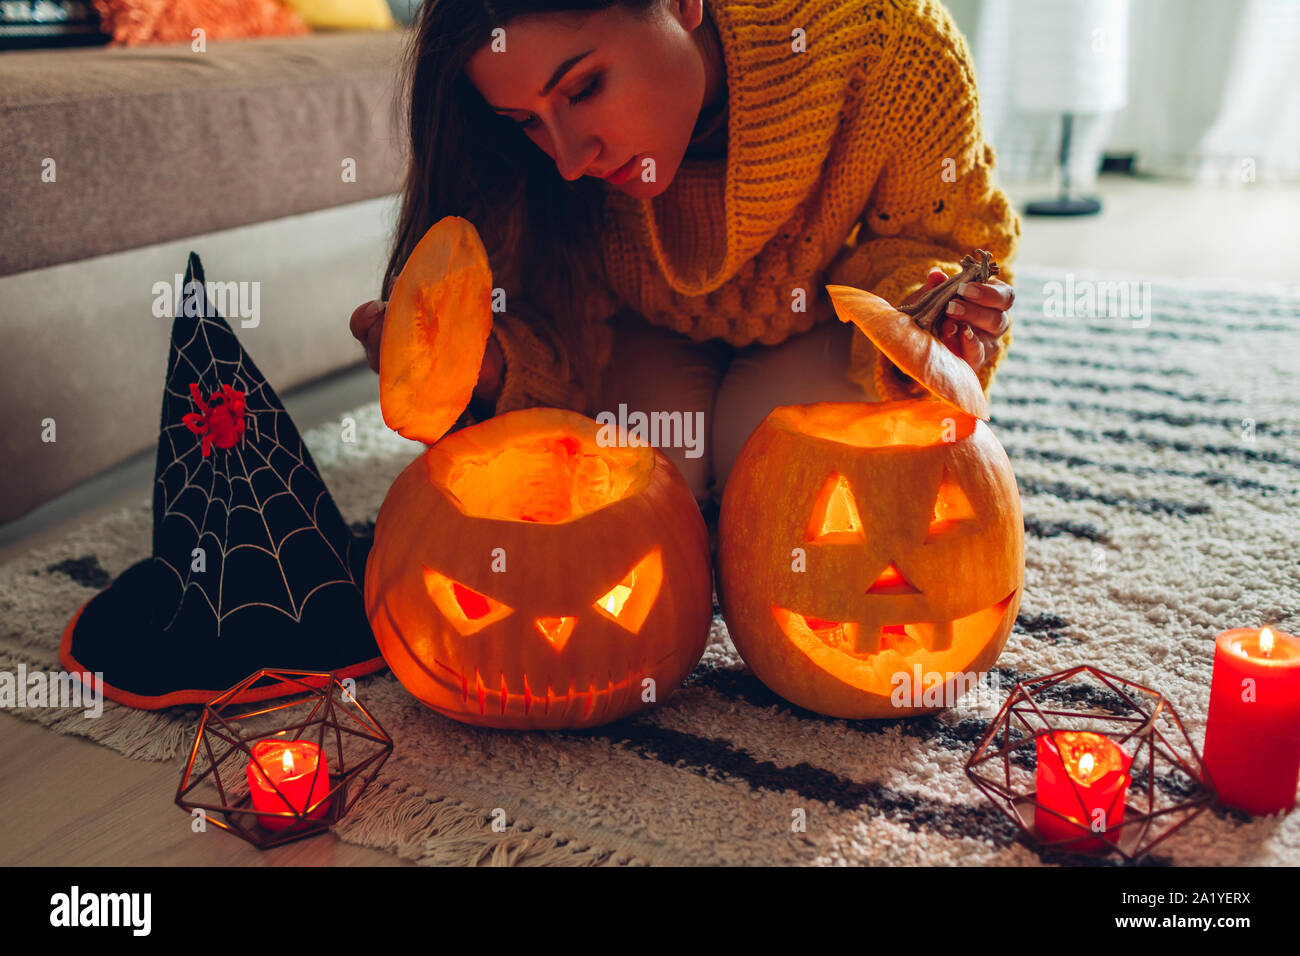 Halloween jack-o-lantern pumpkins. Woman opens pumpkins and looks inside at home. Mysterious holiday Stock Photo